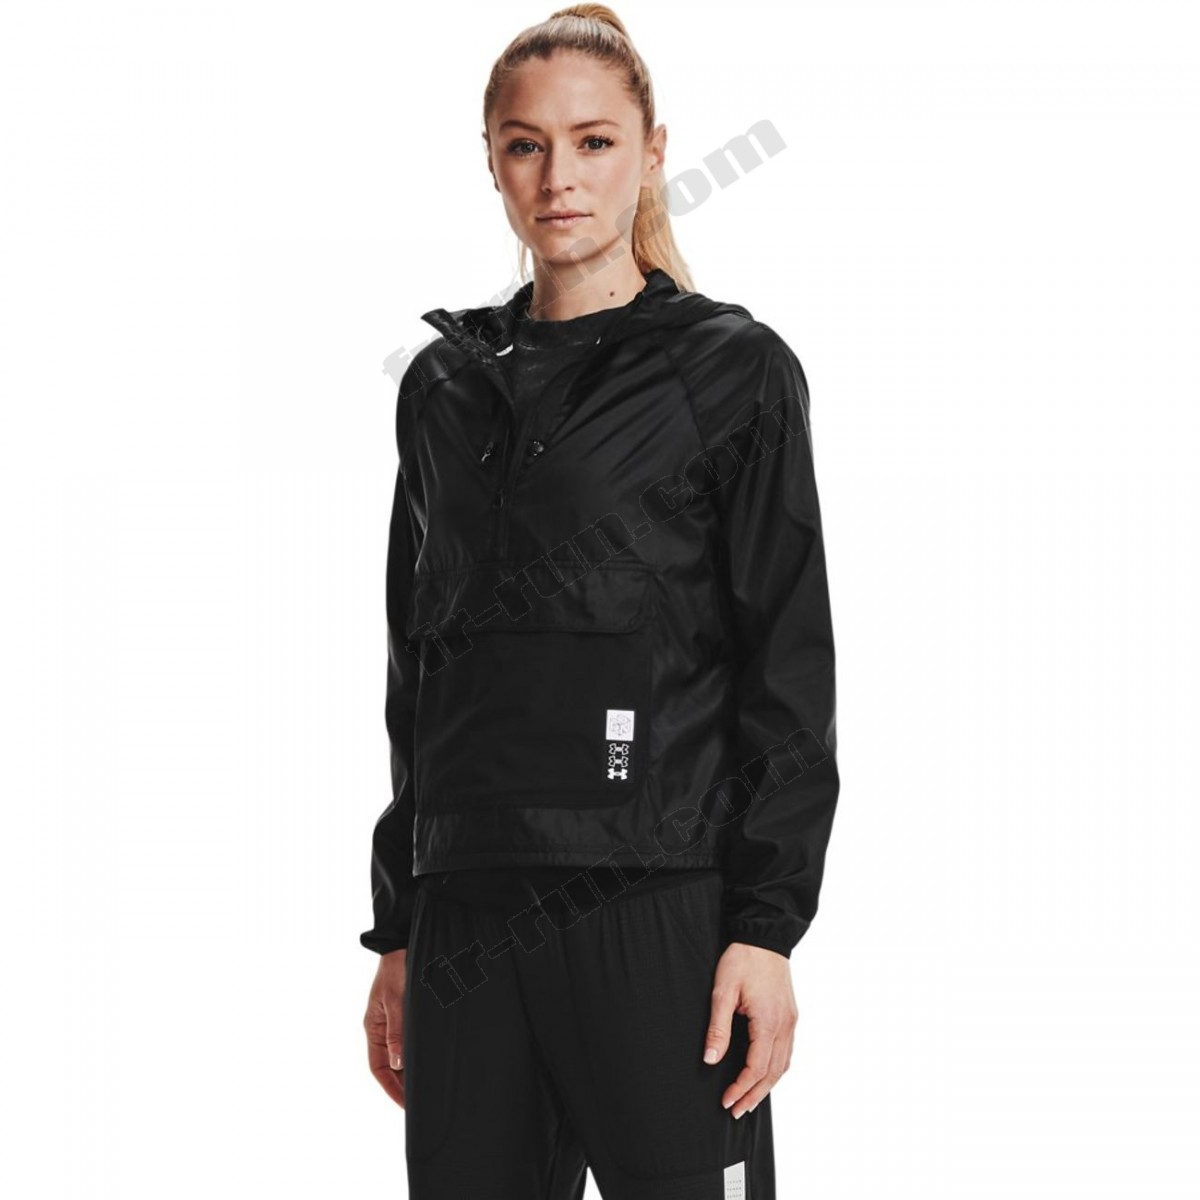 Under Armour/running femme UNDER ARMOUR Under Armour Run Anywhere Anorak √ Nouveau style √ Soldes - Under Armour/running femme UNDER ARMOUR Under Armour Run Anywhere Anorak √ Nouveau style √ Soldes